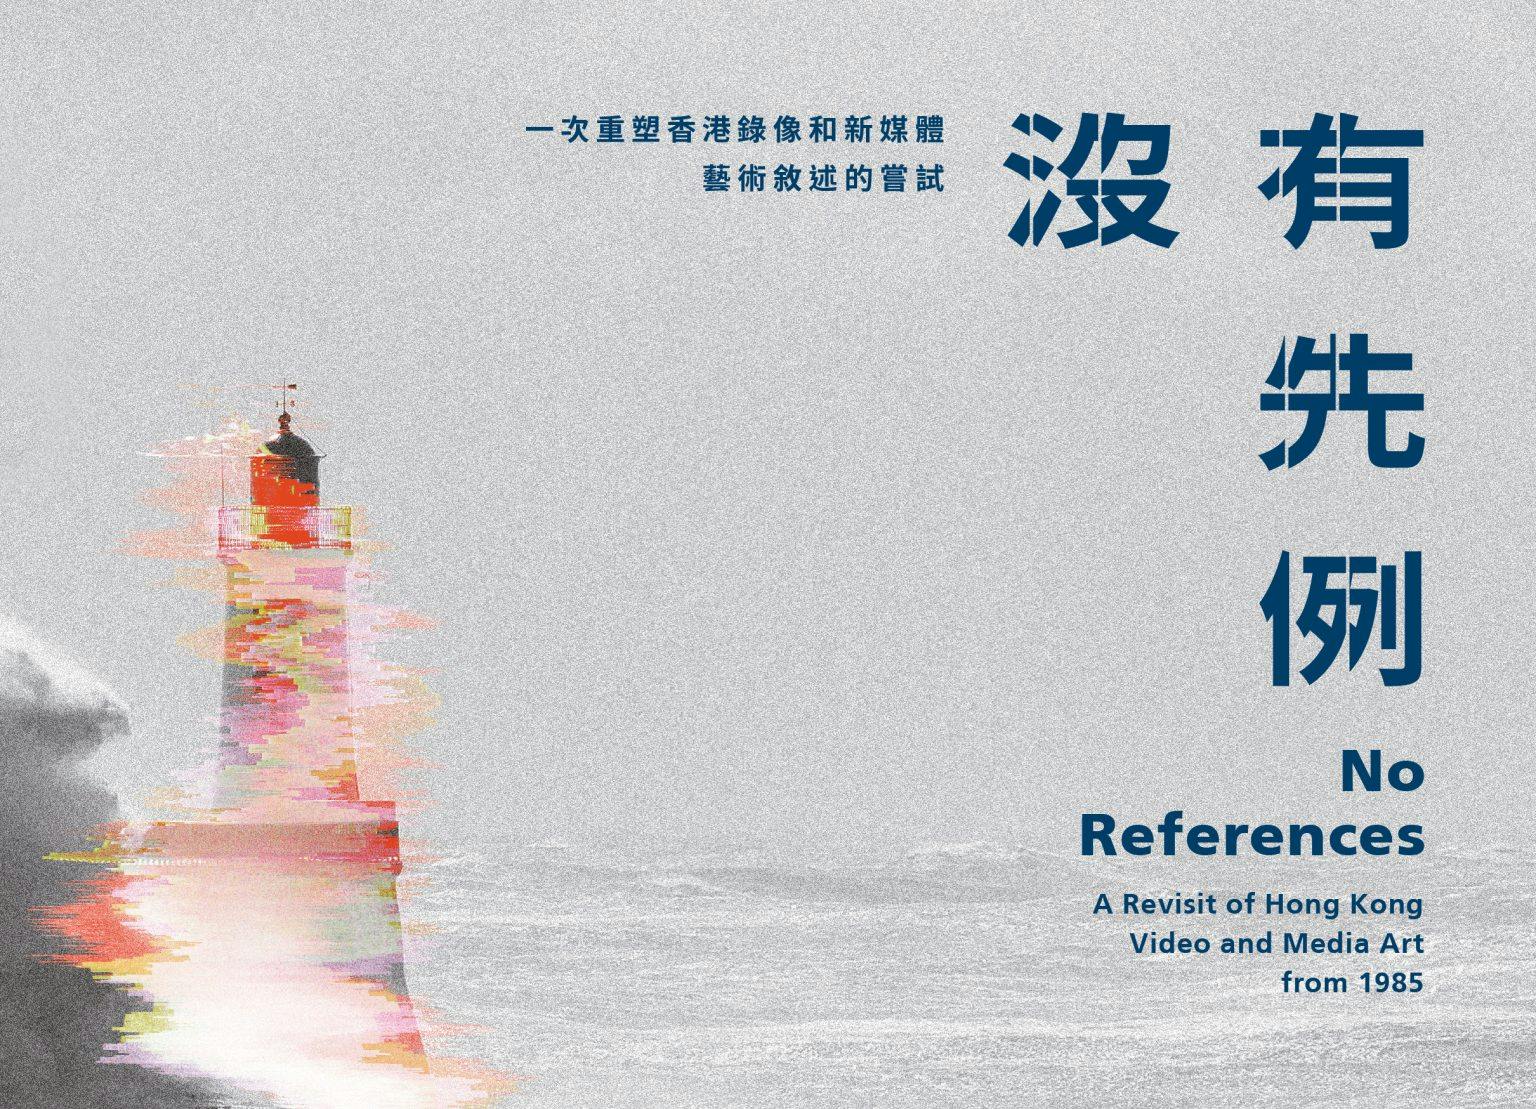 No References: A Revisit of Hong Kong Video and Media Art from 1985 沒有先例：一次重塑香港錄像和新媒體藝術敘述的嘗試